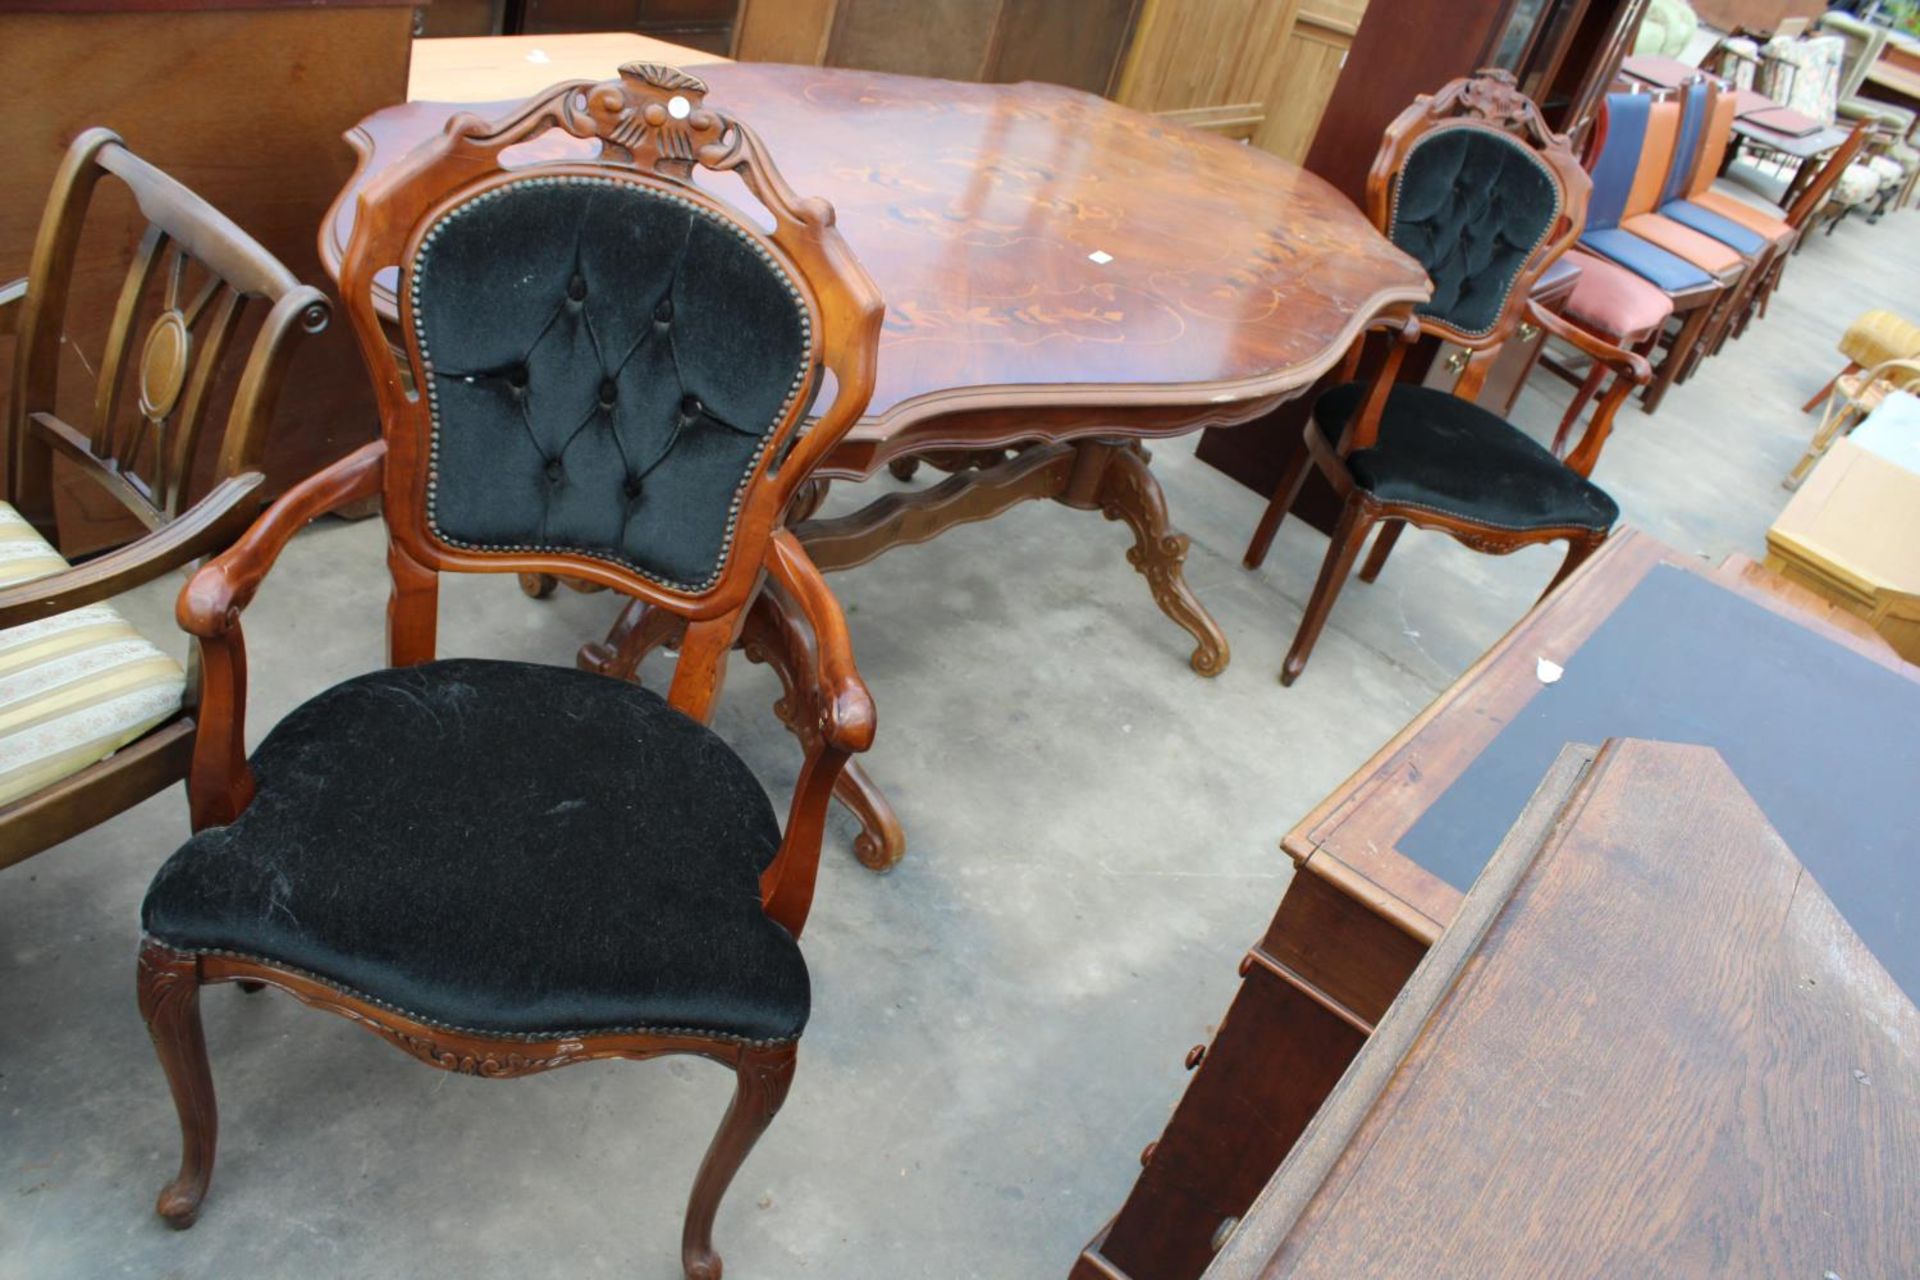 AN ITALIAN STYLE PEDESTAL DINING TABLE WITH MARQUETRY TOP AND A PAIR OF CARVER CHAIRS - Image 4 of 6